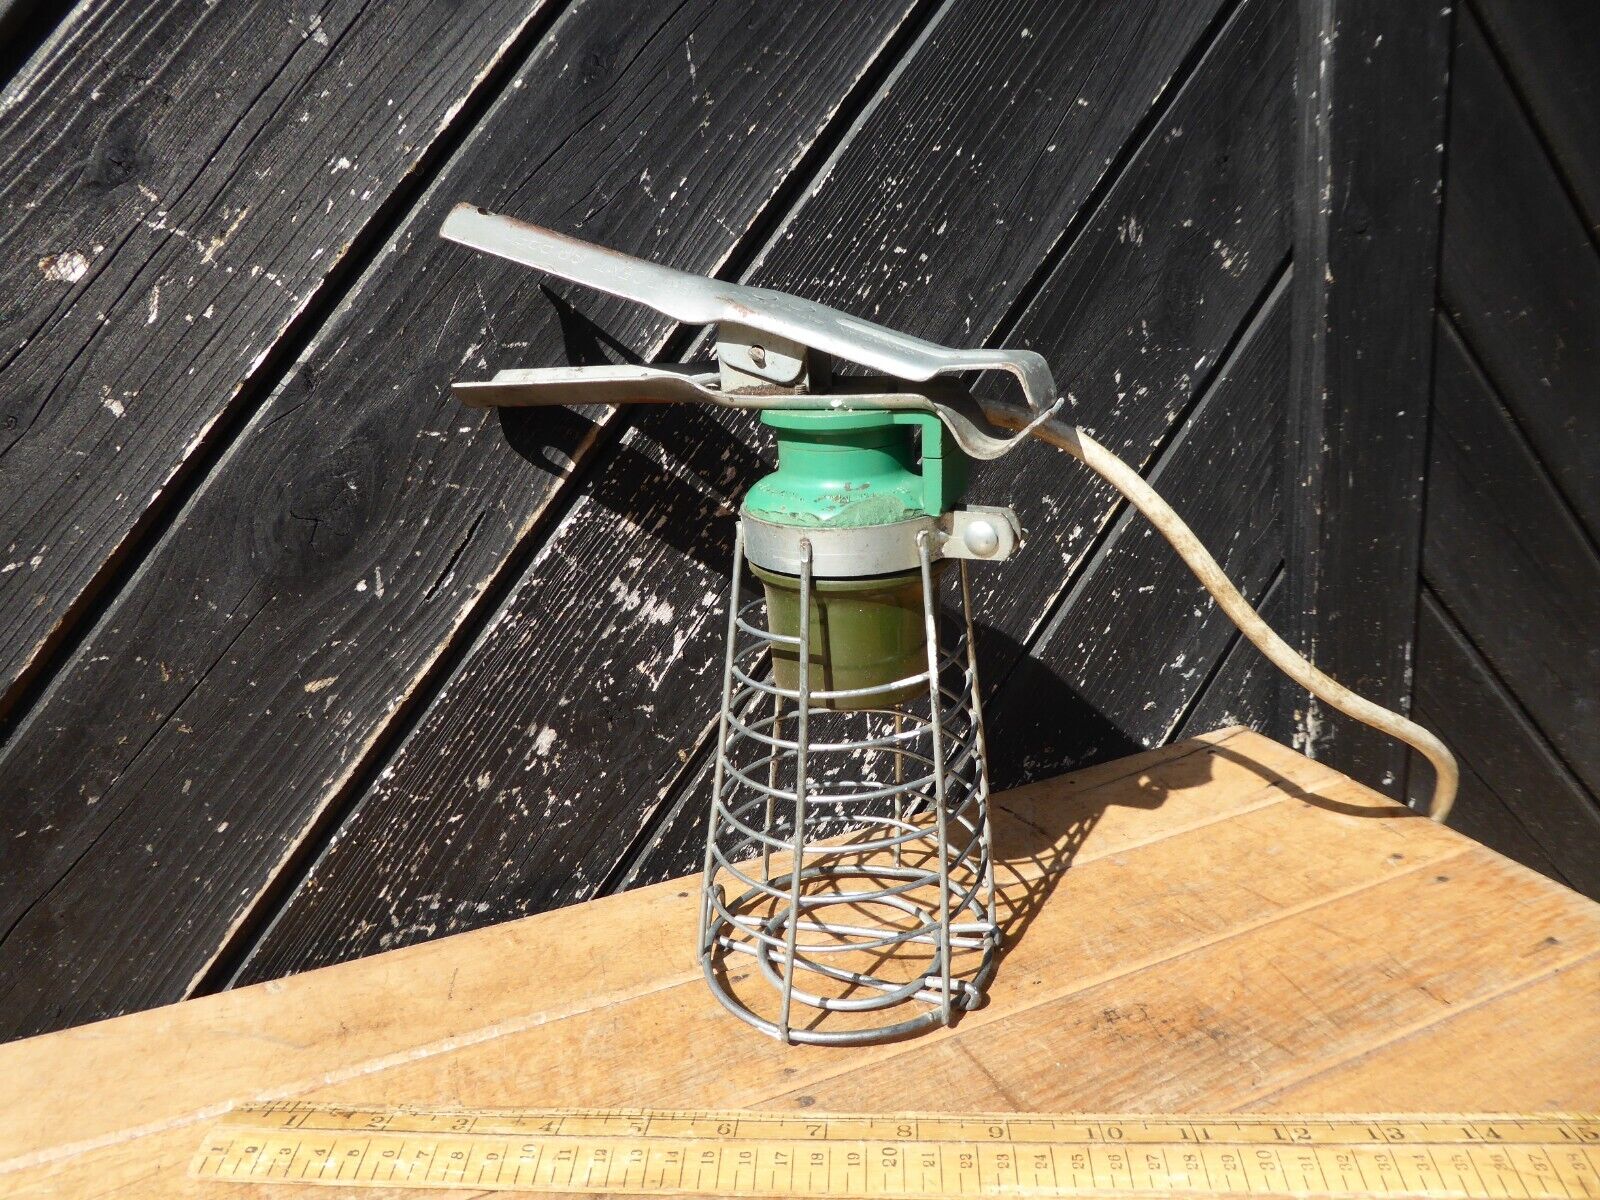 Vintage Briticent Gripper Inspection lamp / hand lamp .Working.